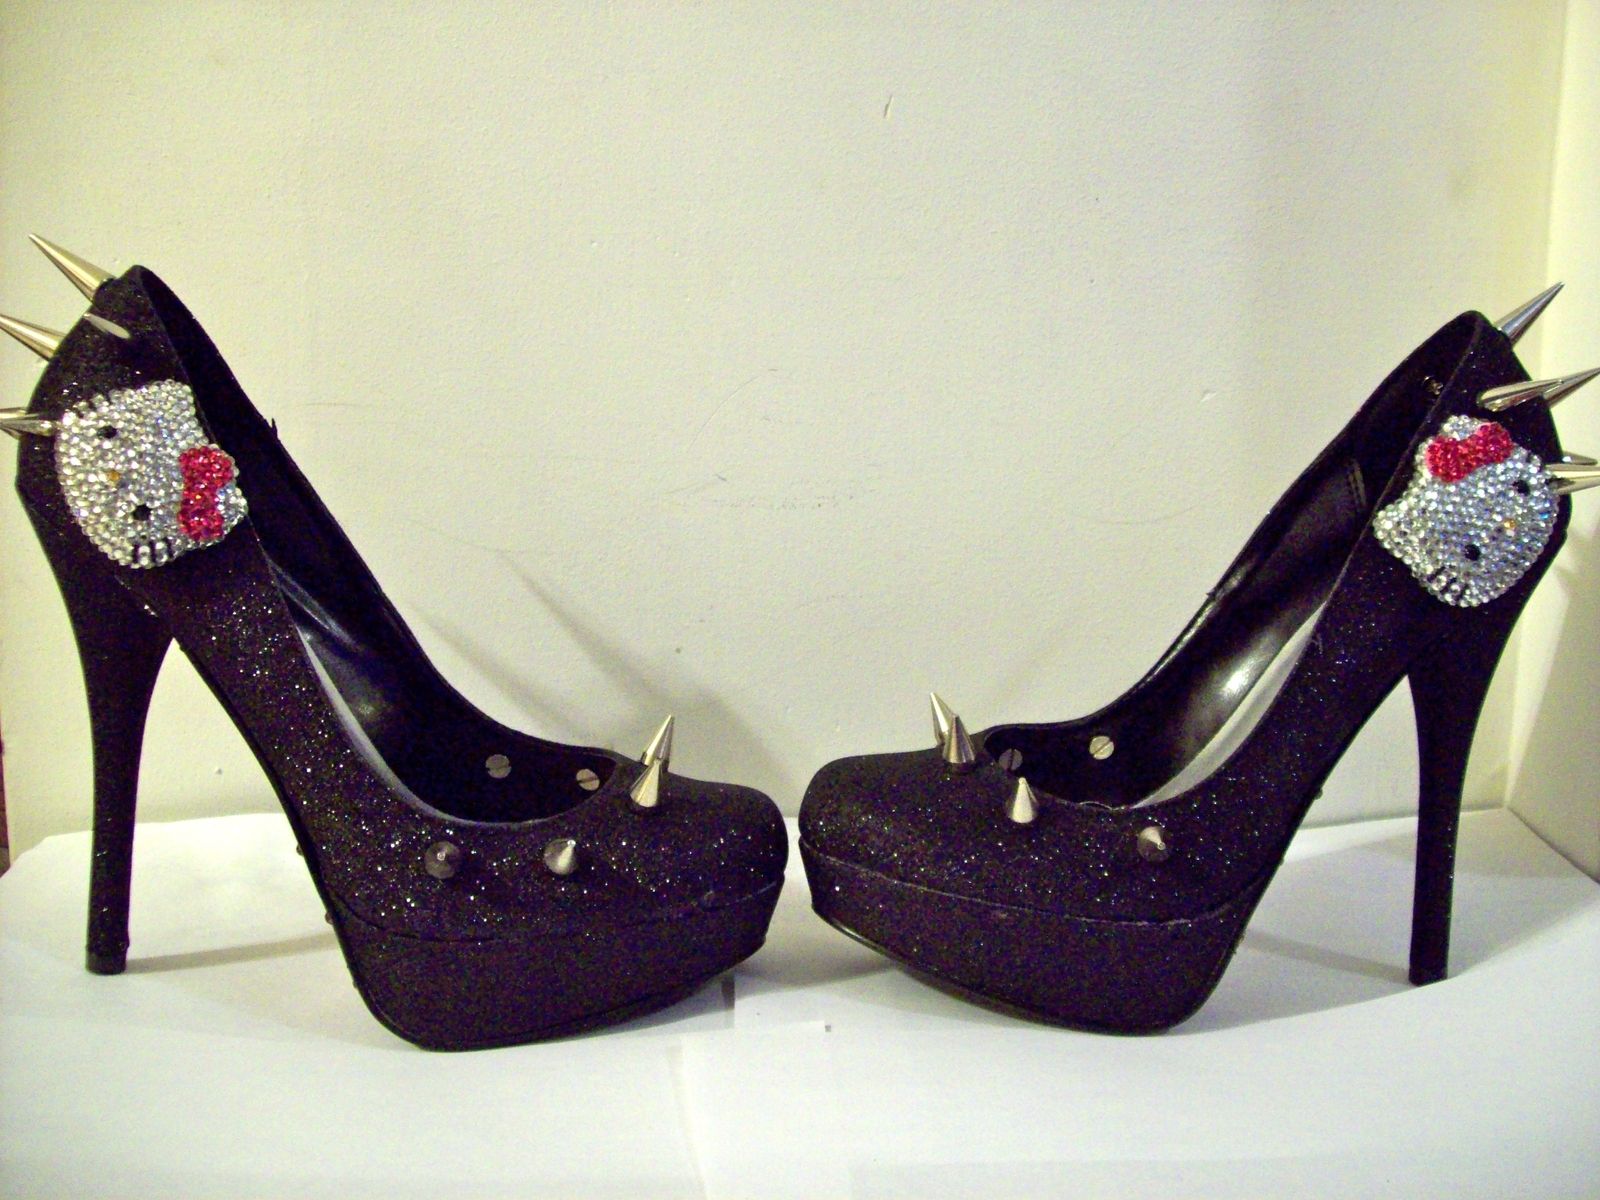 Buy a Hand Made Hello Kitty Heels  Spiked Kitty  Your 